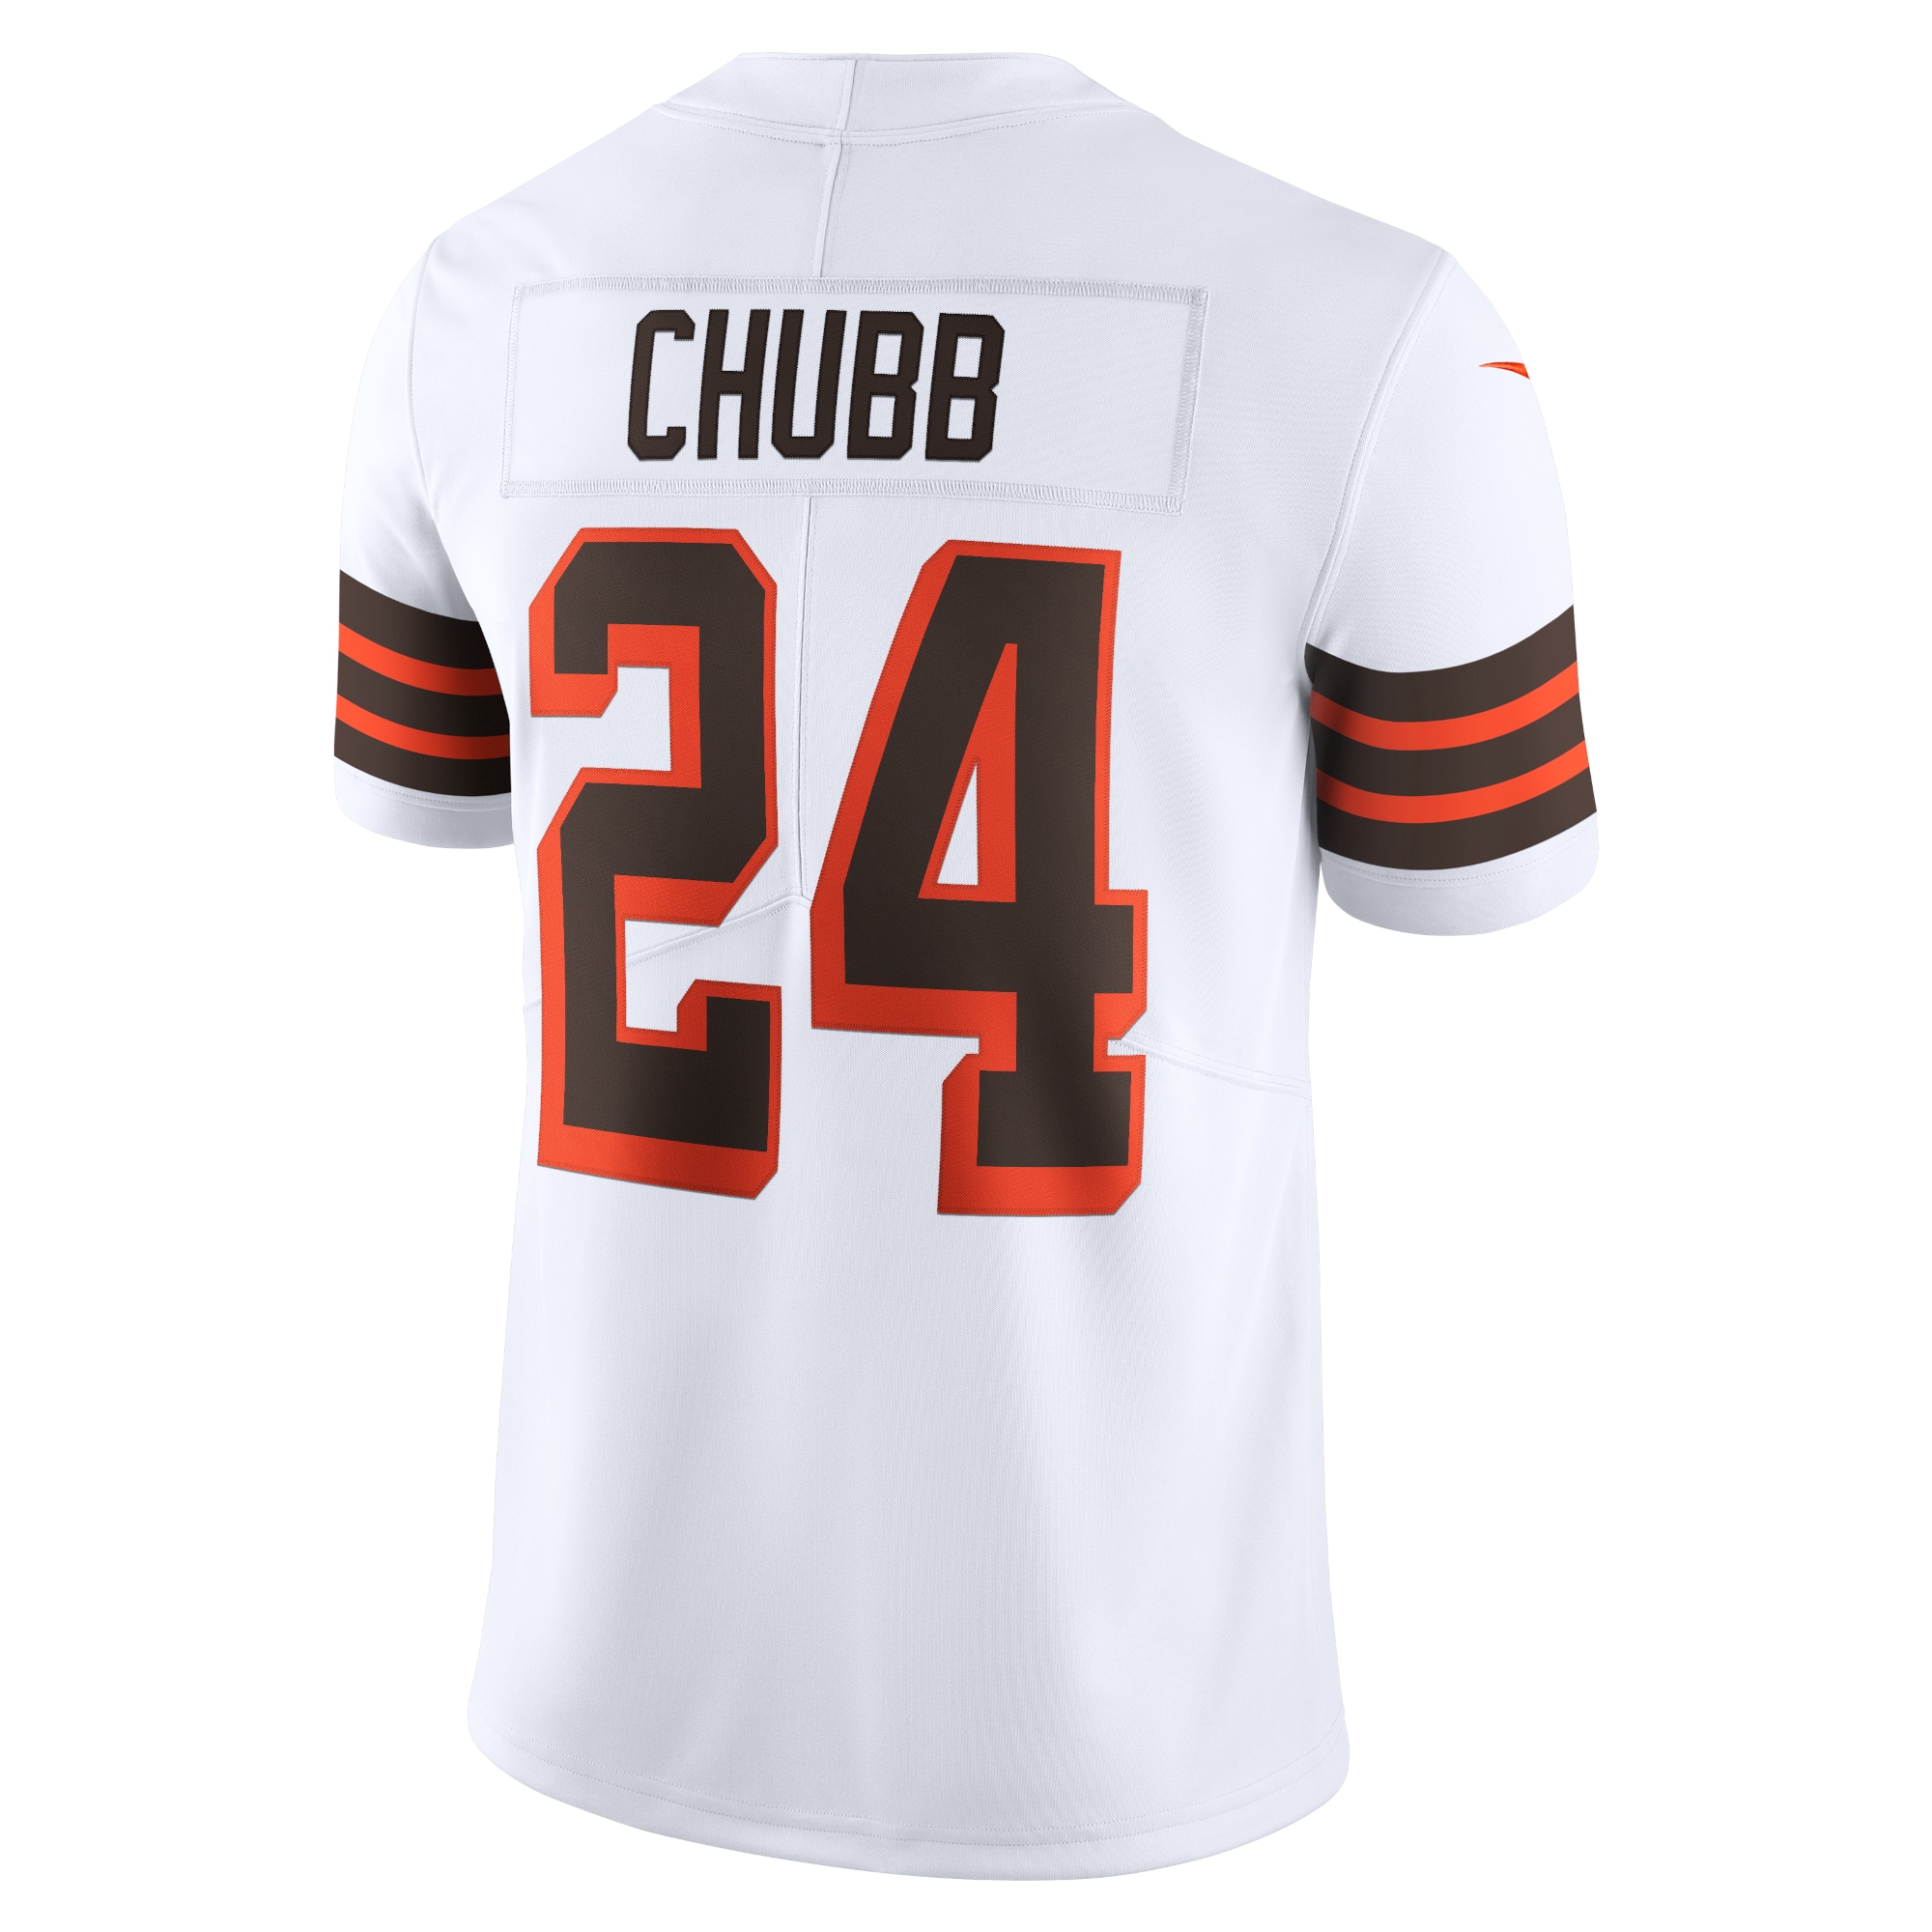 Men's Cleveland Browns Jerseys White Nick Chubb 1946 Collection Alternate Vapor Limited Style